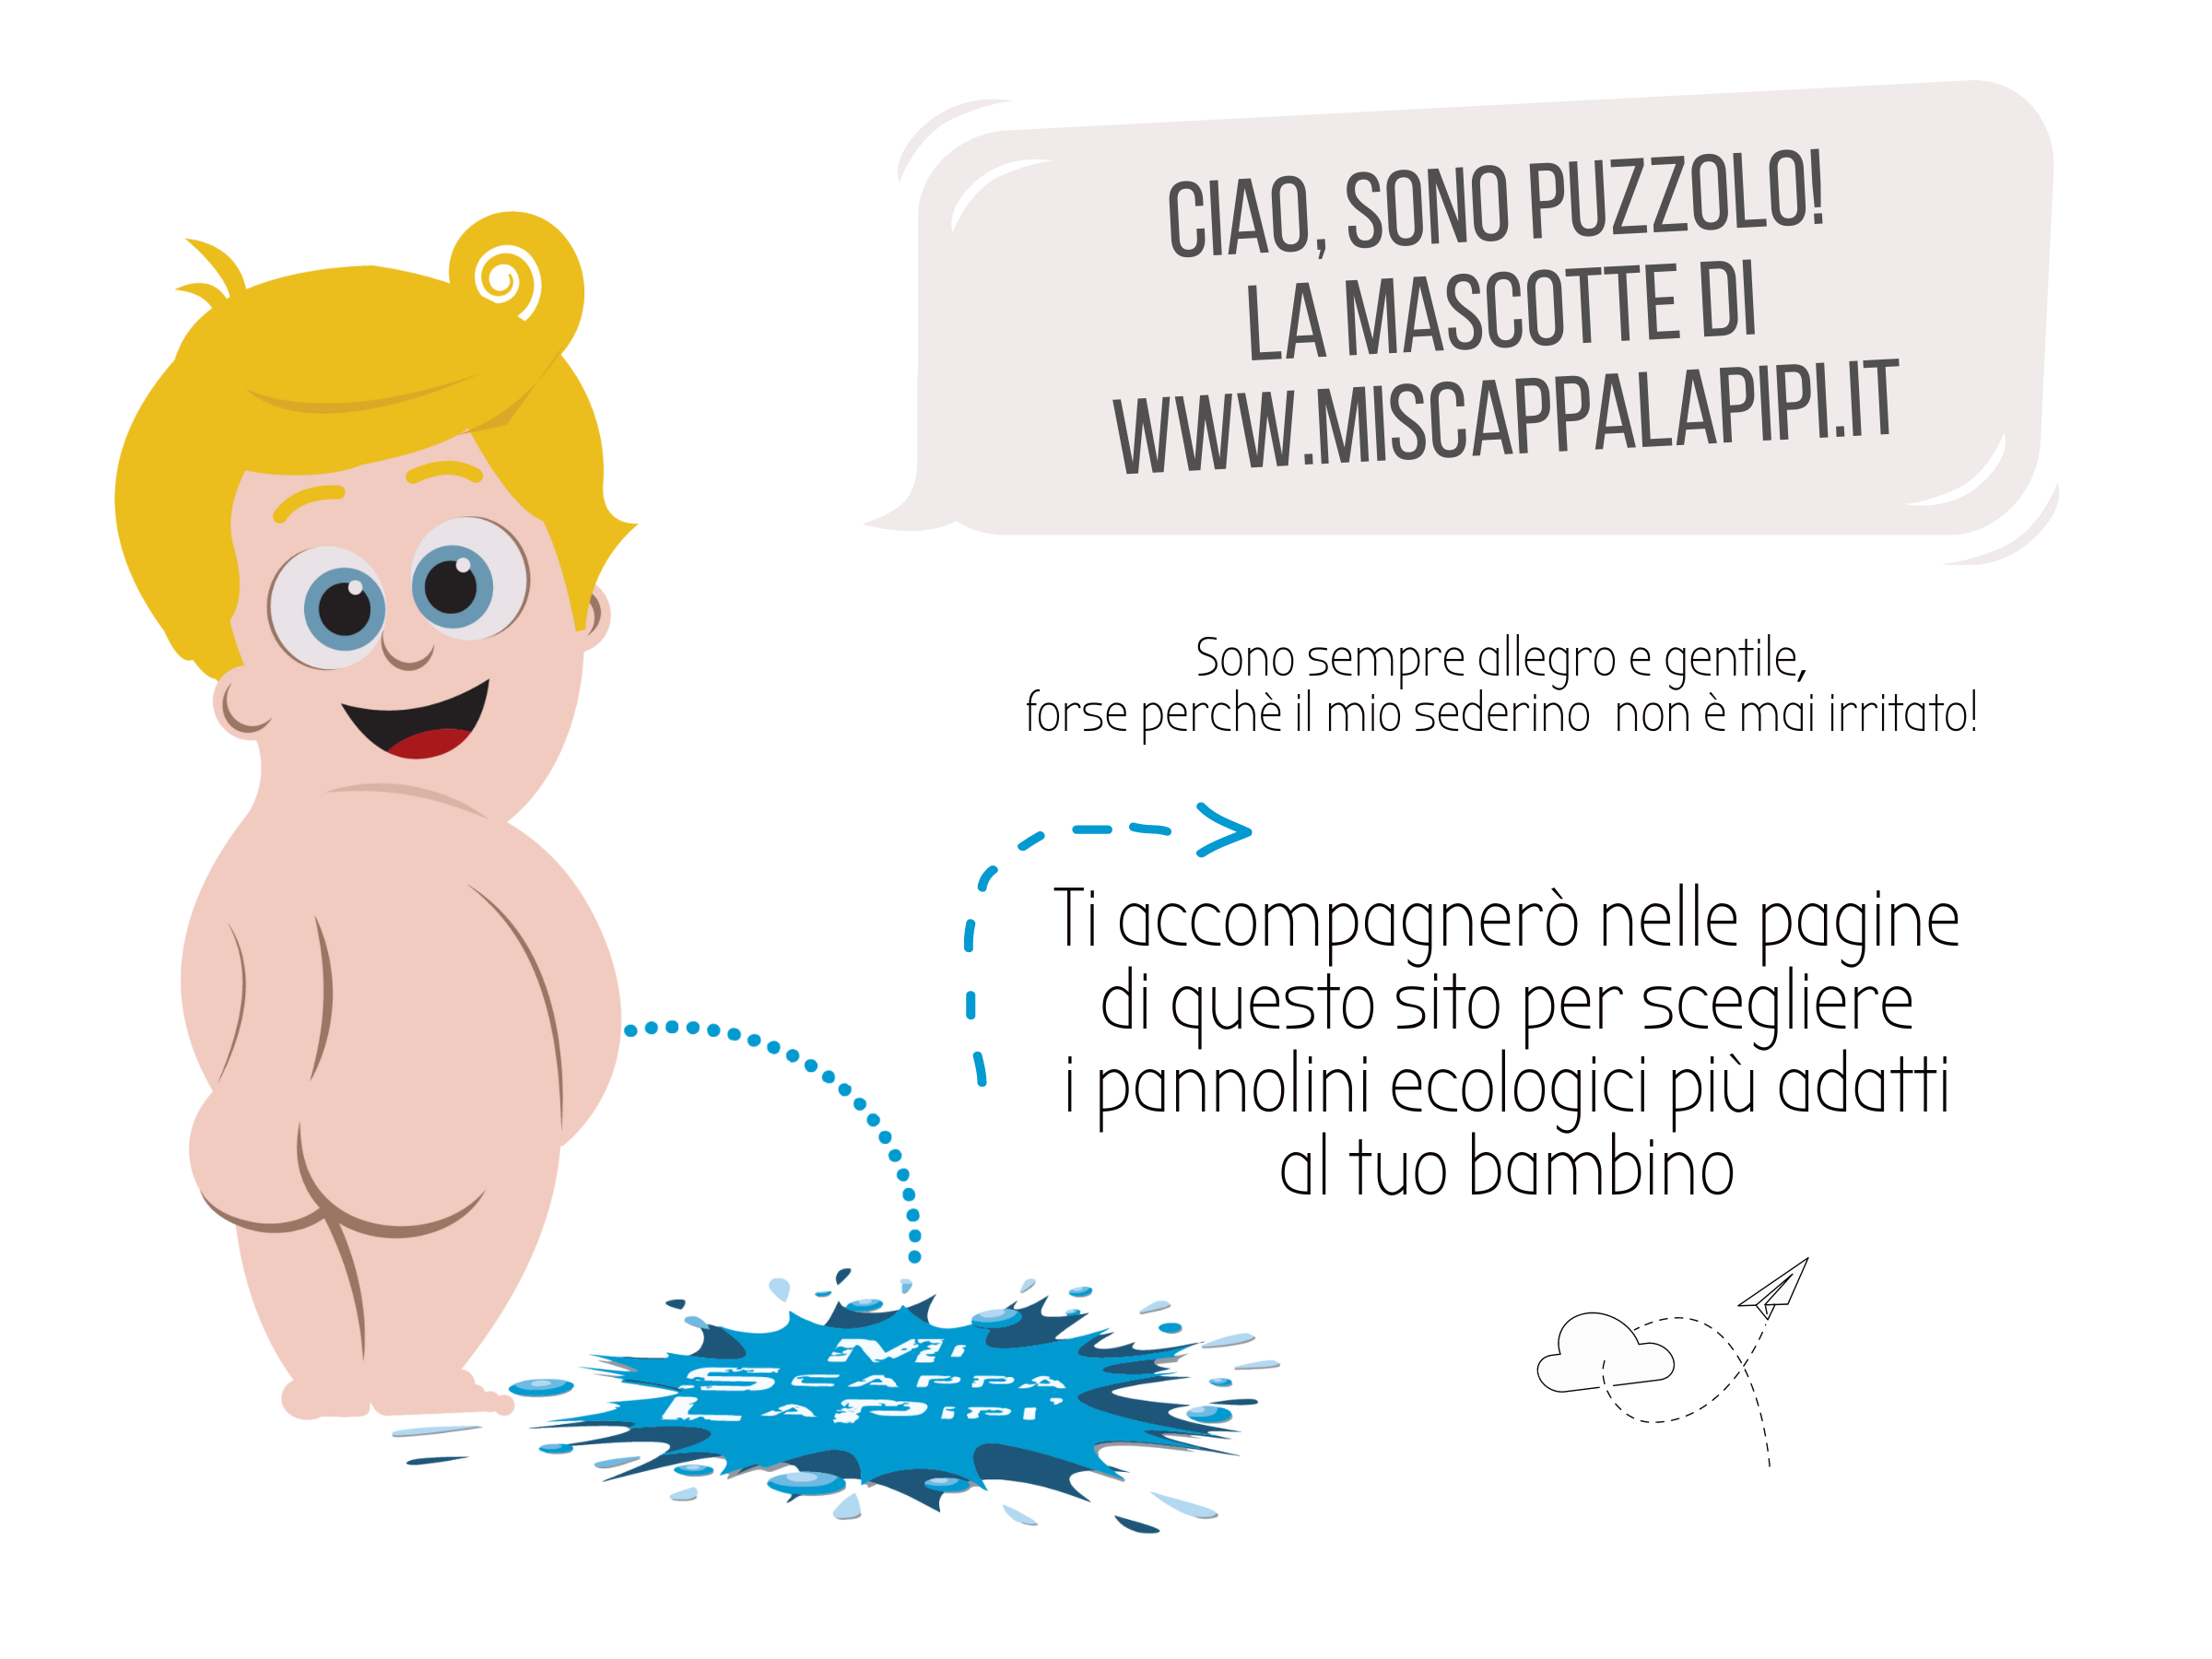 puzzolo-mascotte-miscappalapipi